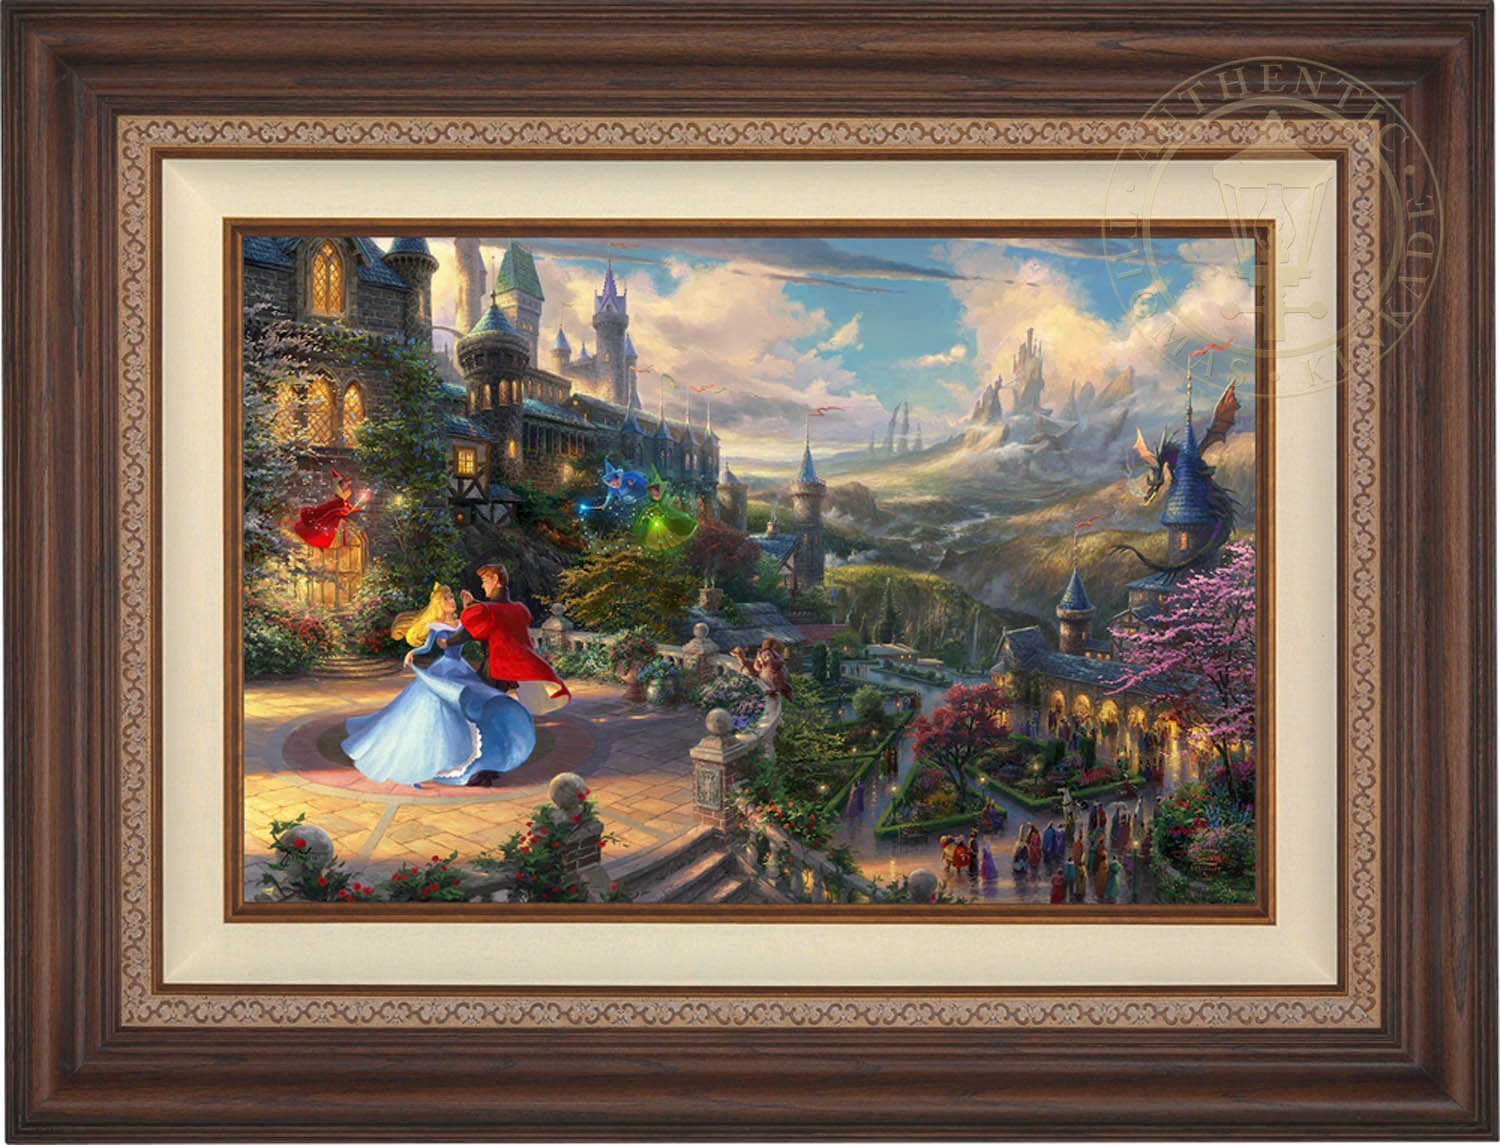 Prince Phillip has awakened Princess Aurora with true love’s kiss, dancing in courtyard under an enchanted light streaming down from the good fairies - Dark Walnut Frame